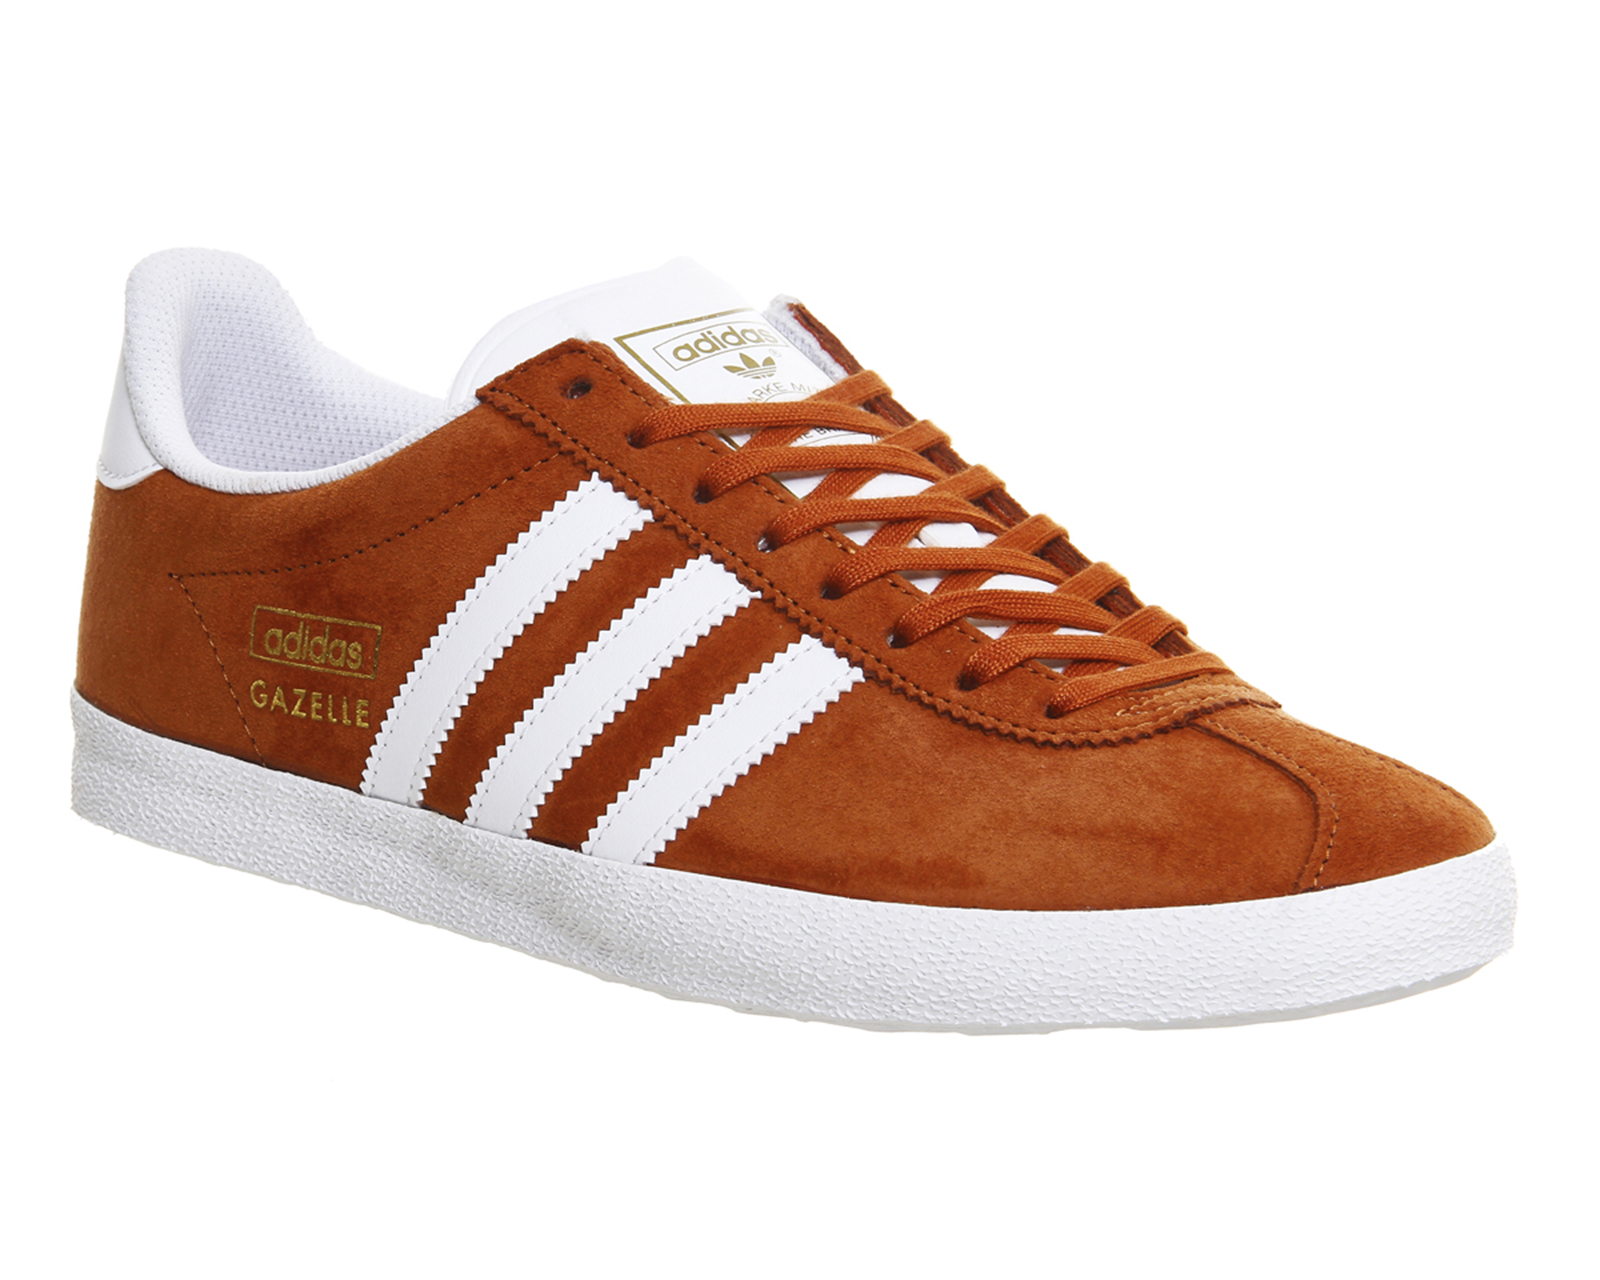 Adidas Gazelle Og Red / adidas Originals Gazelle OG Trainers - Bright Red / There's the gazelle og, which was first introduced all the way back in 1968 as an indoor soccer shoe.